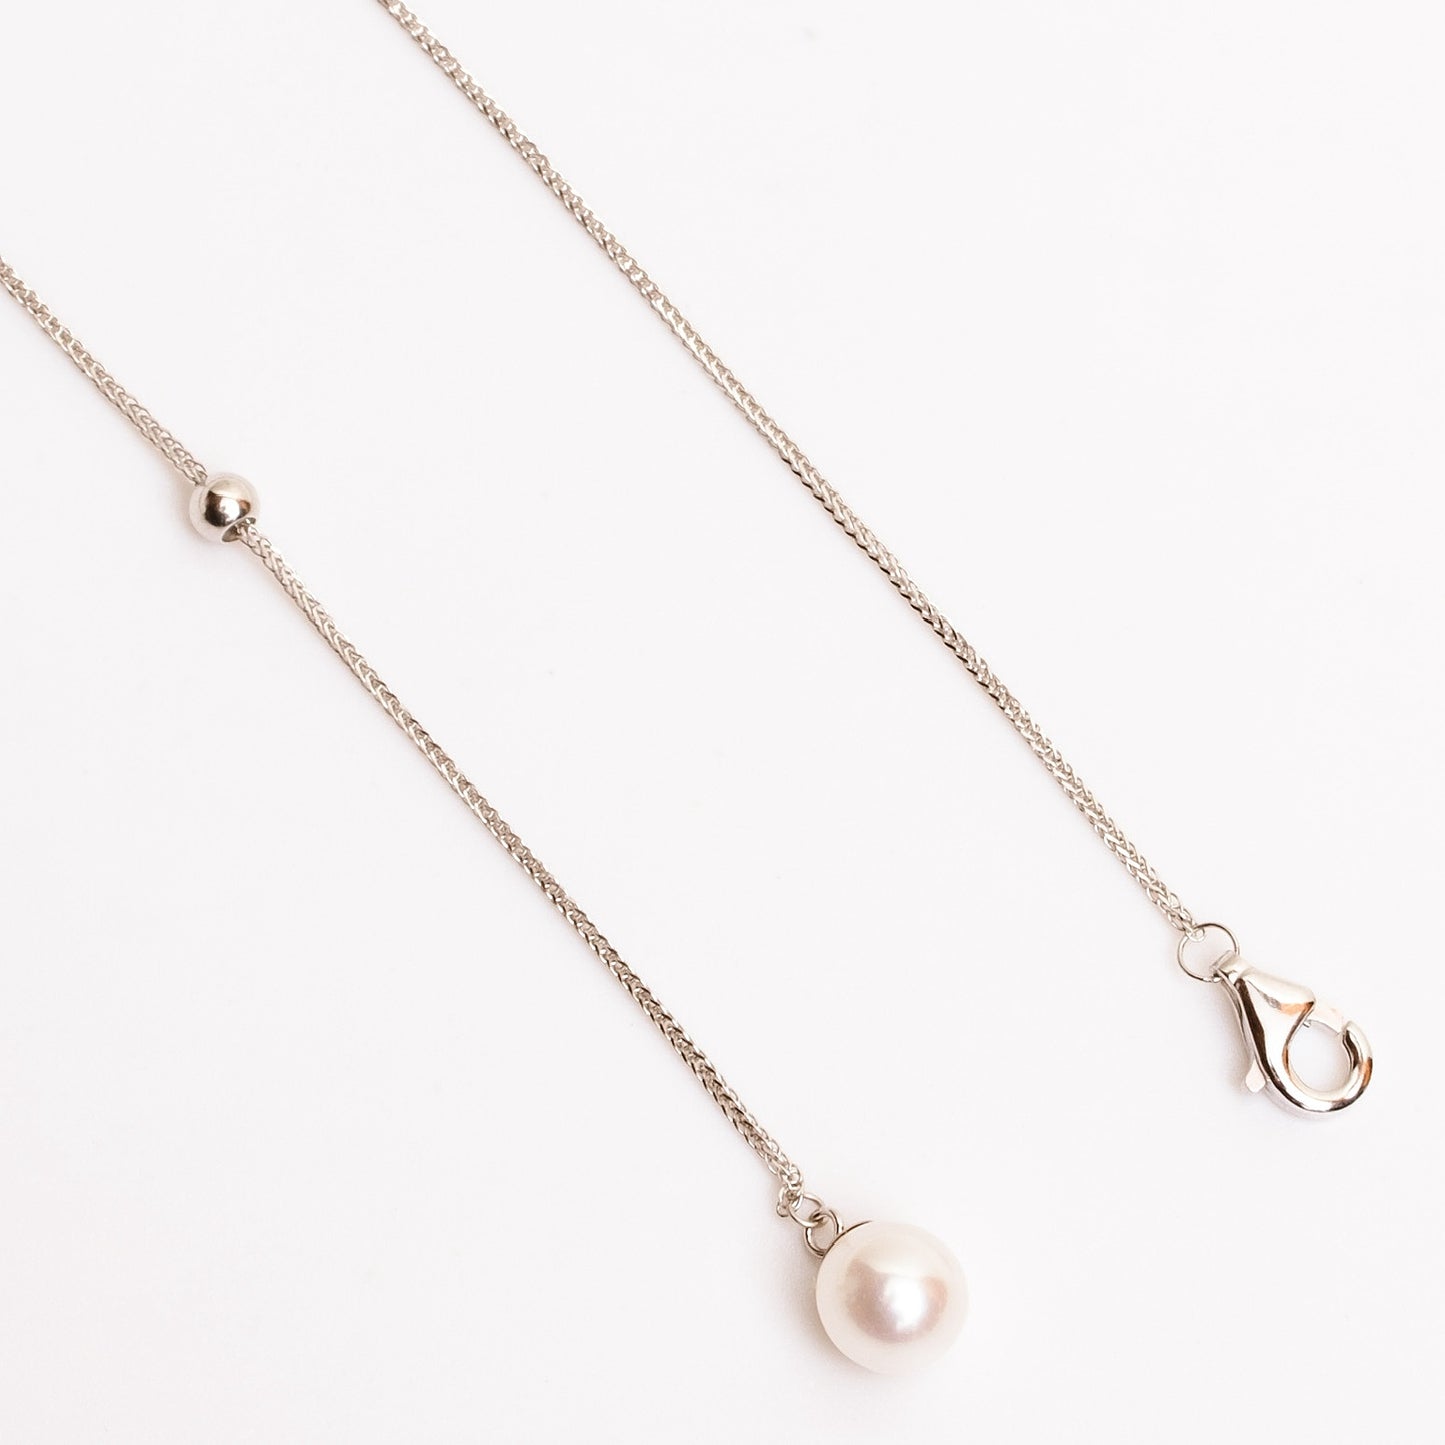 Cultured Pearl Pendant Necklace - 11mm